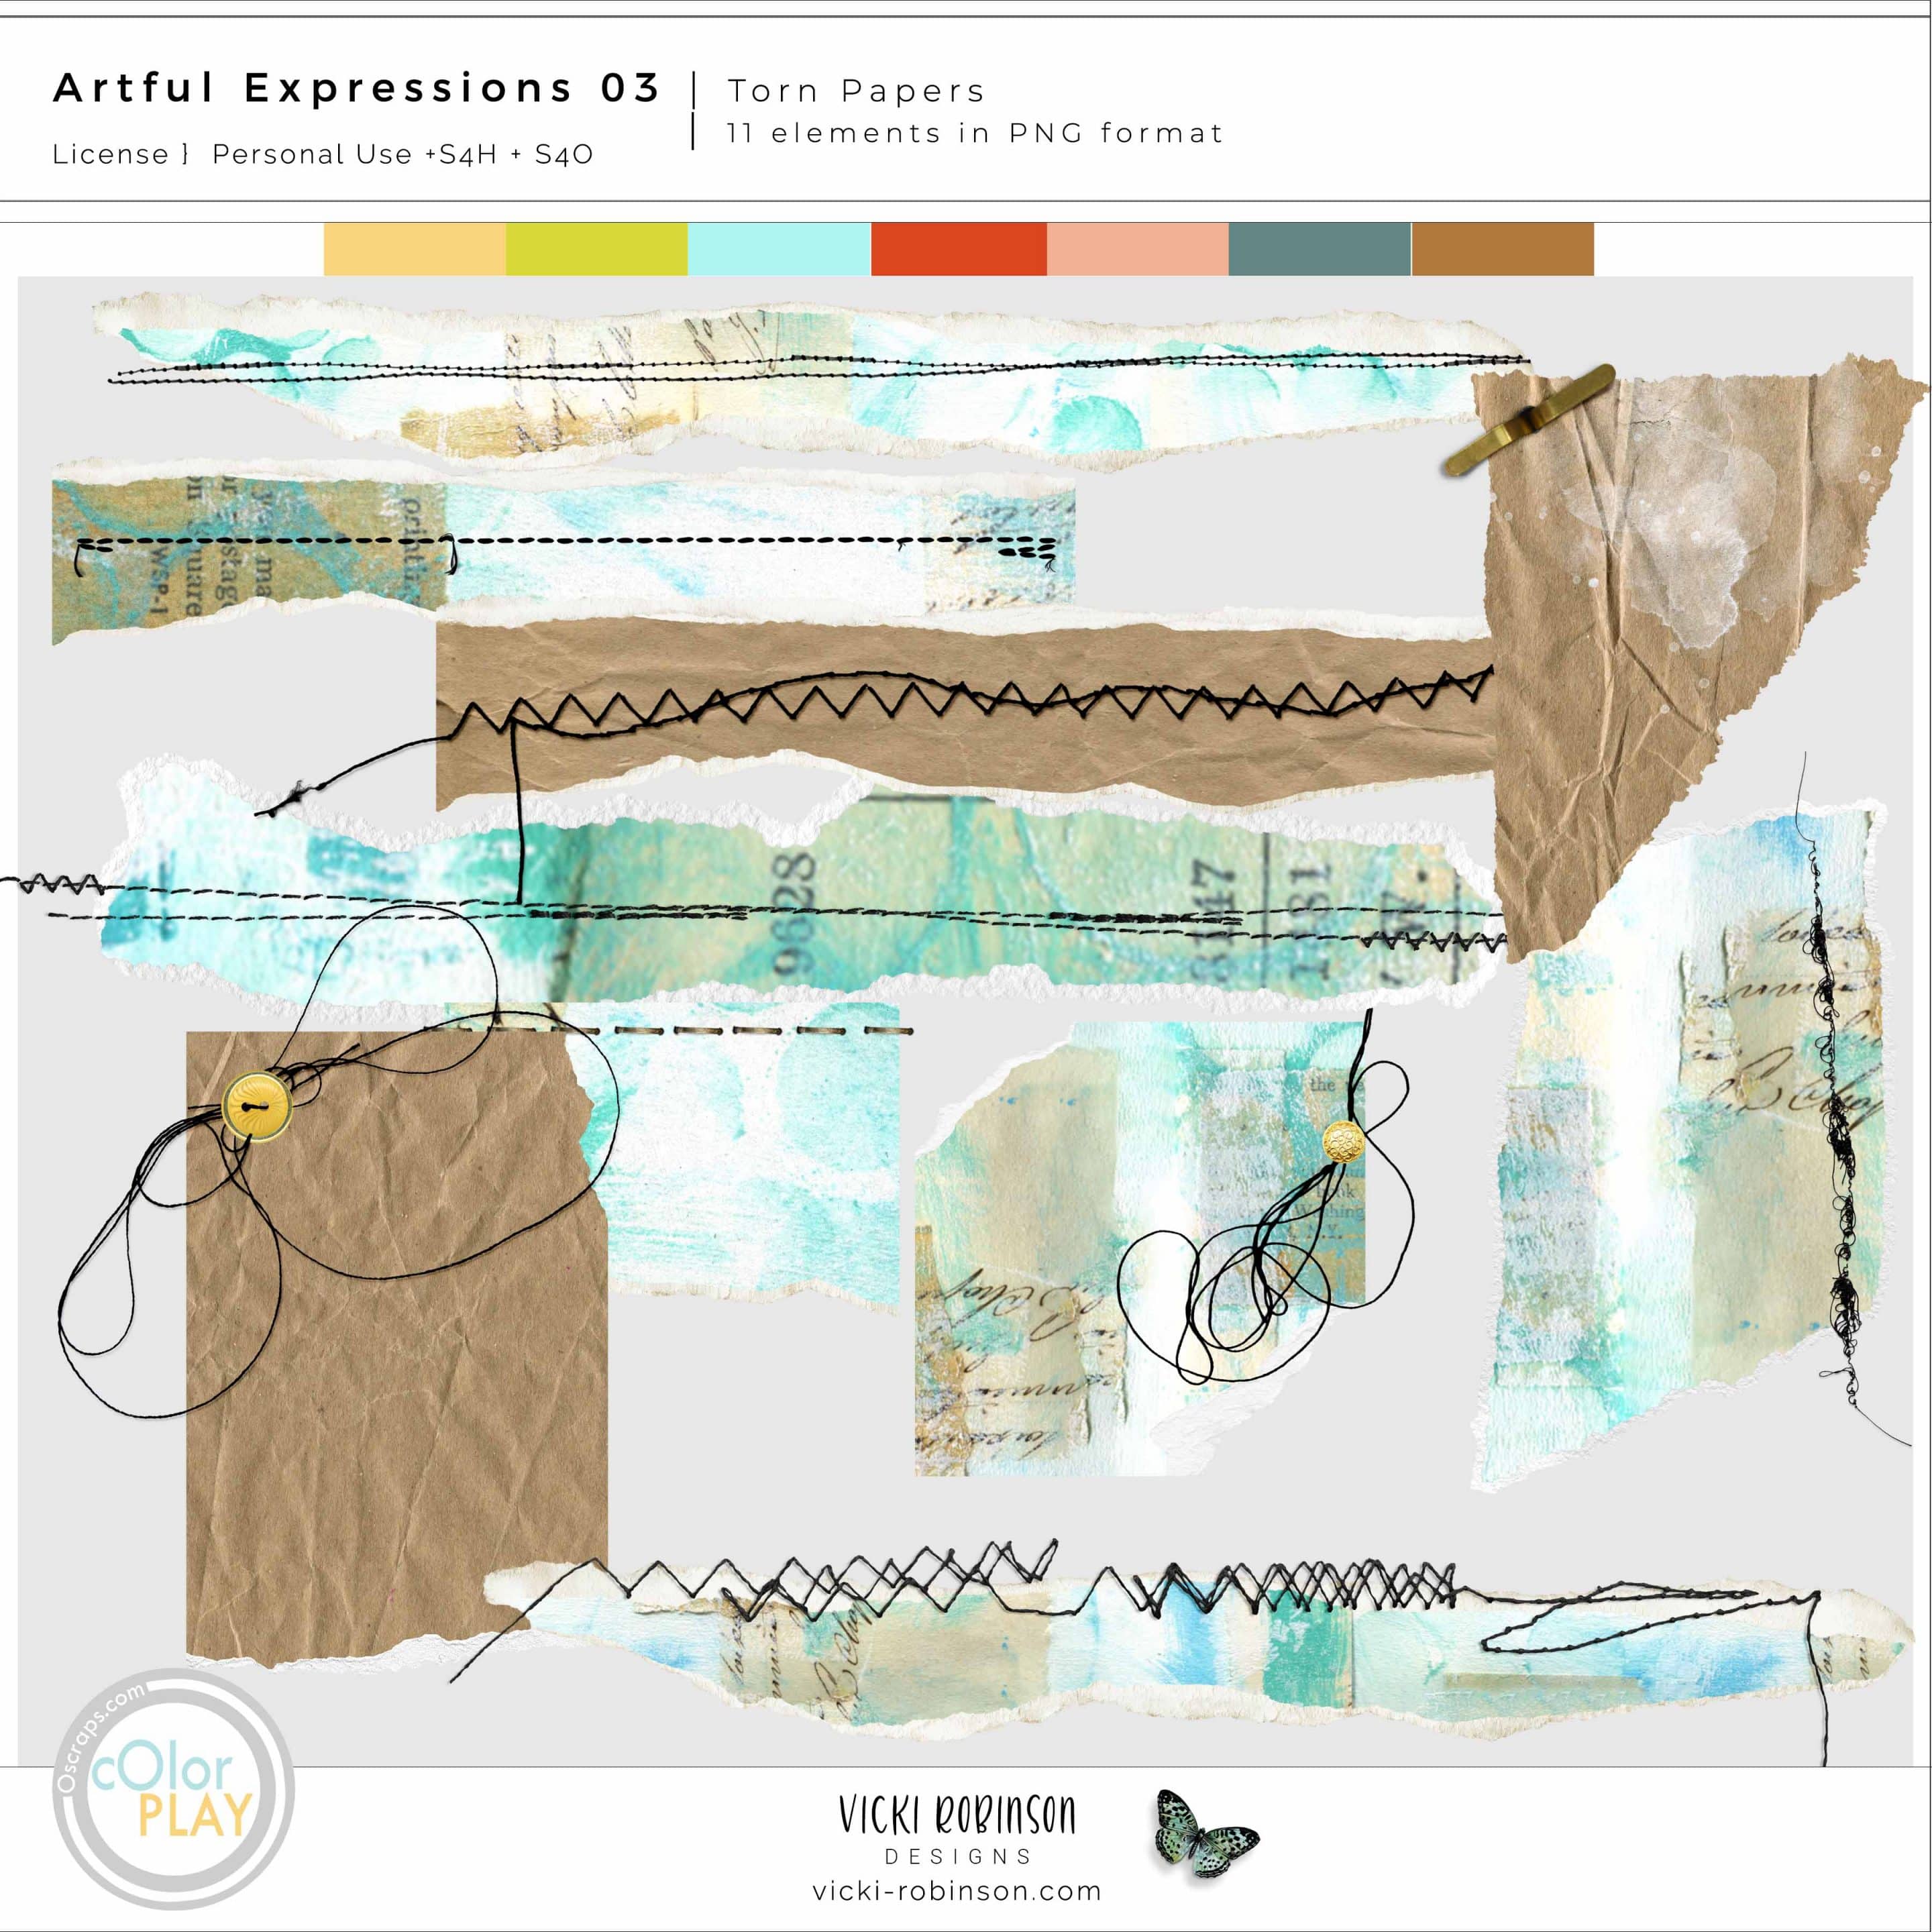 Artful Expressions 03 Torn Papers Preview by VIcki Robinson